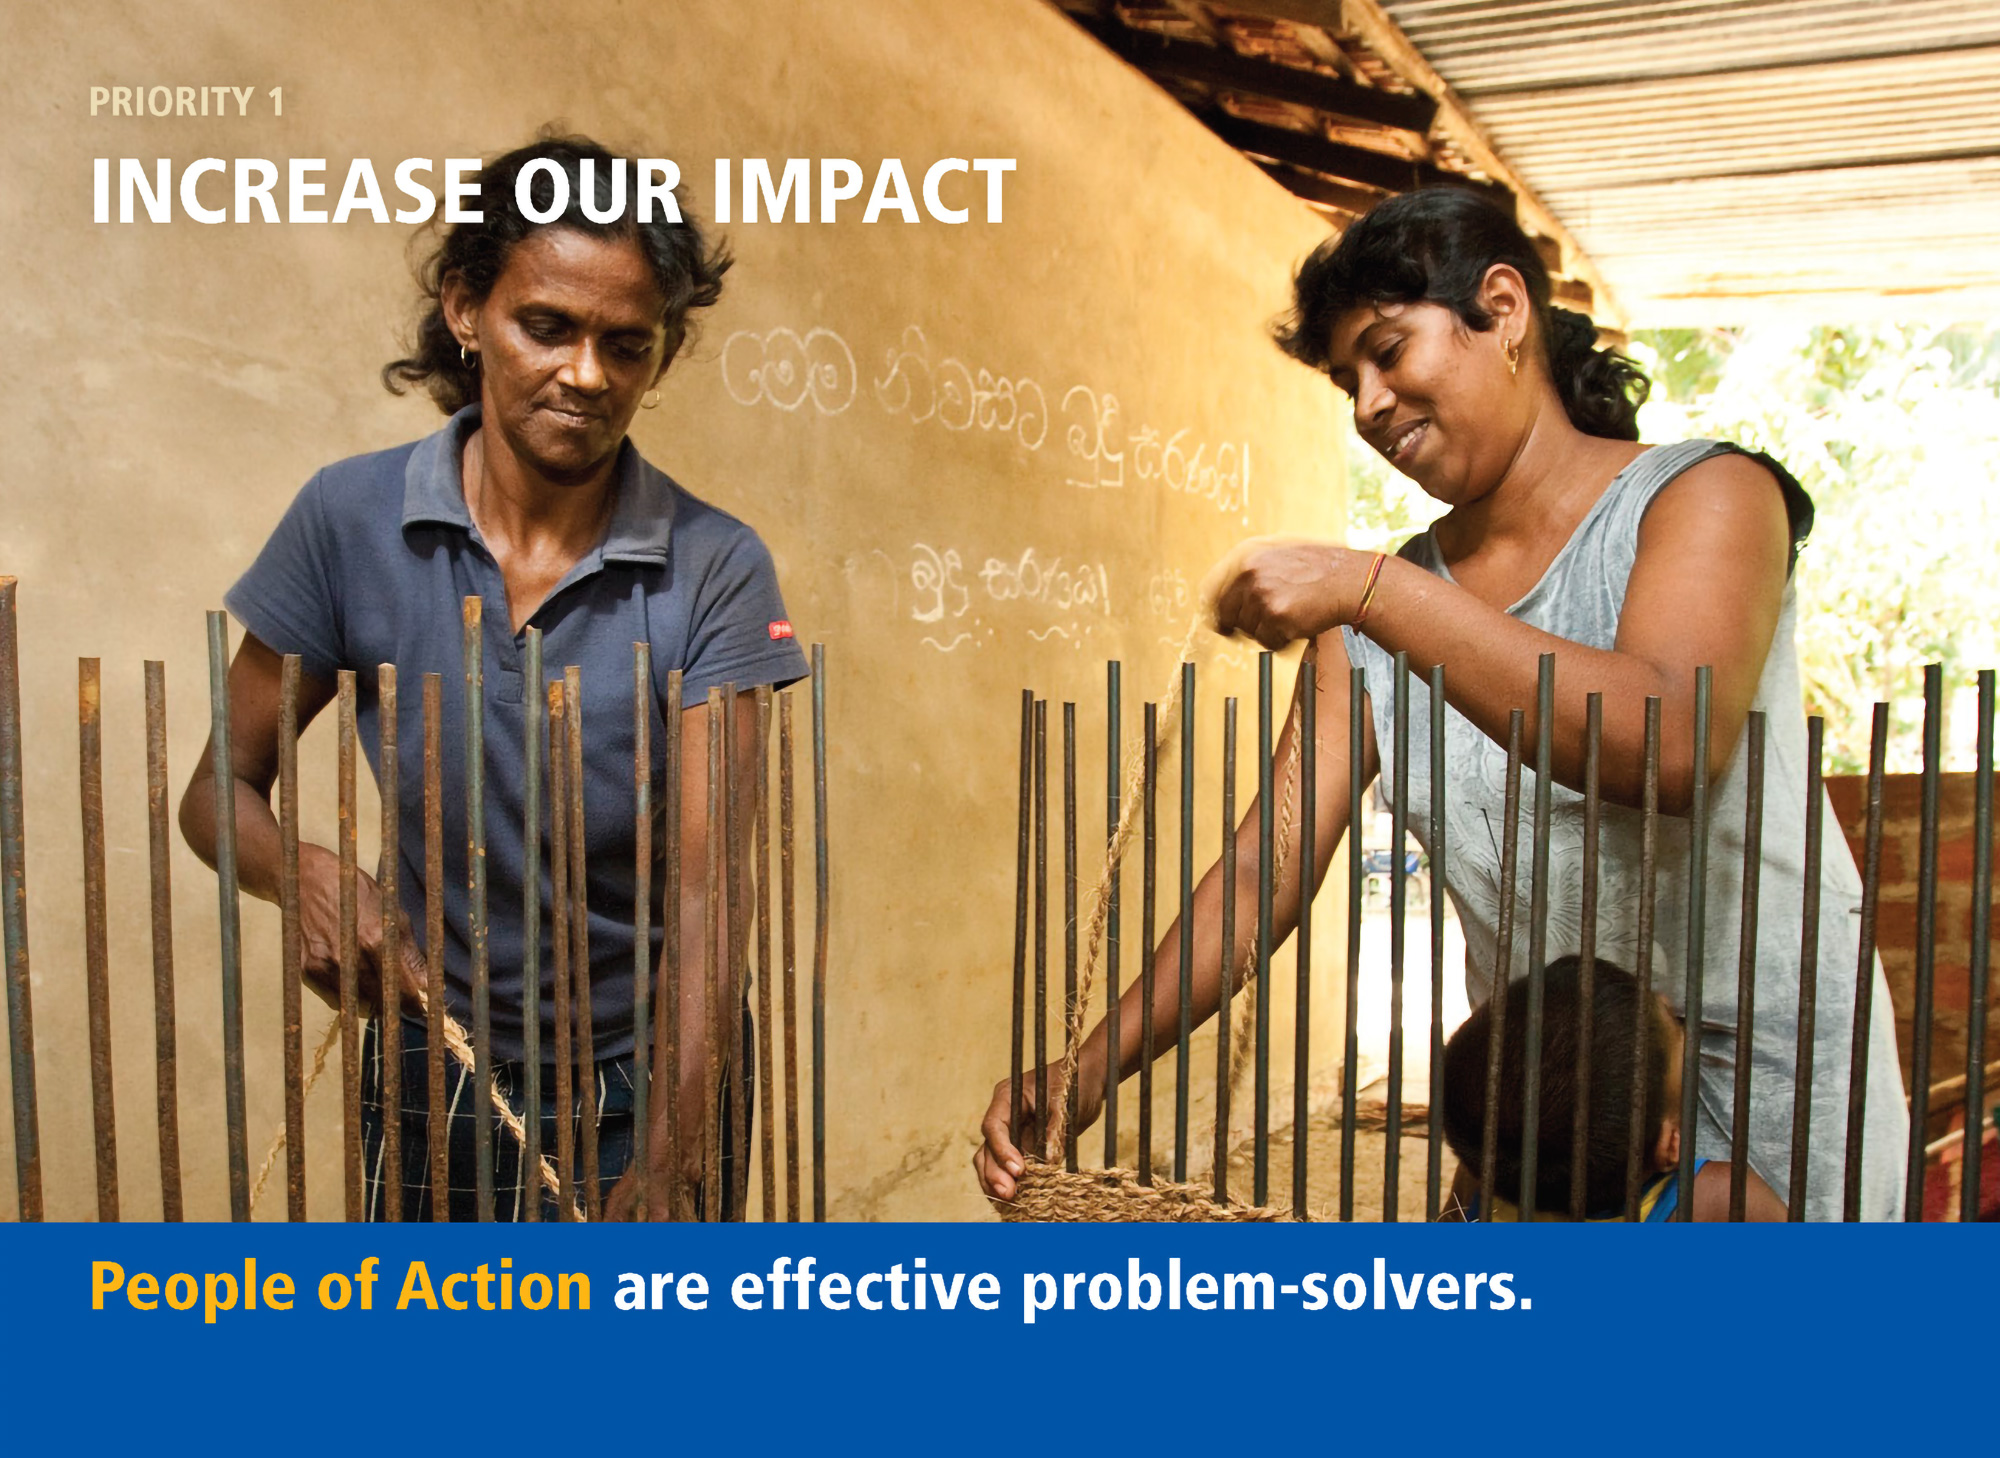 People of action are effective problem-solvers.